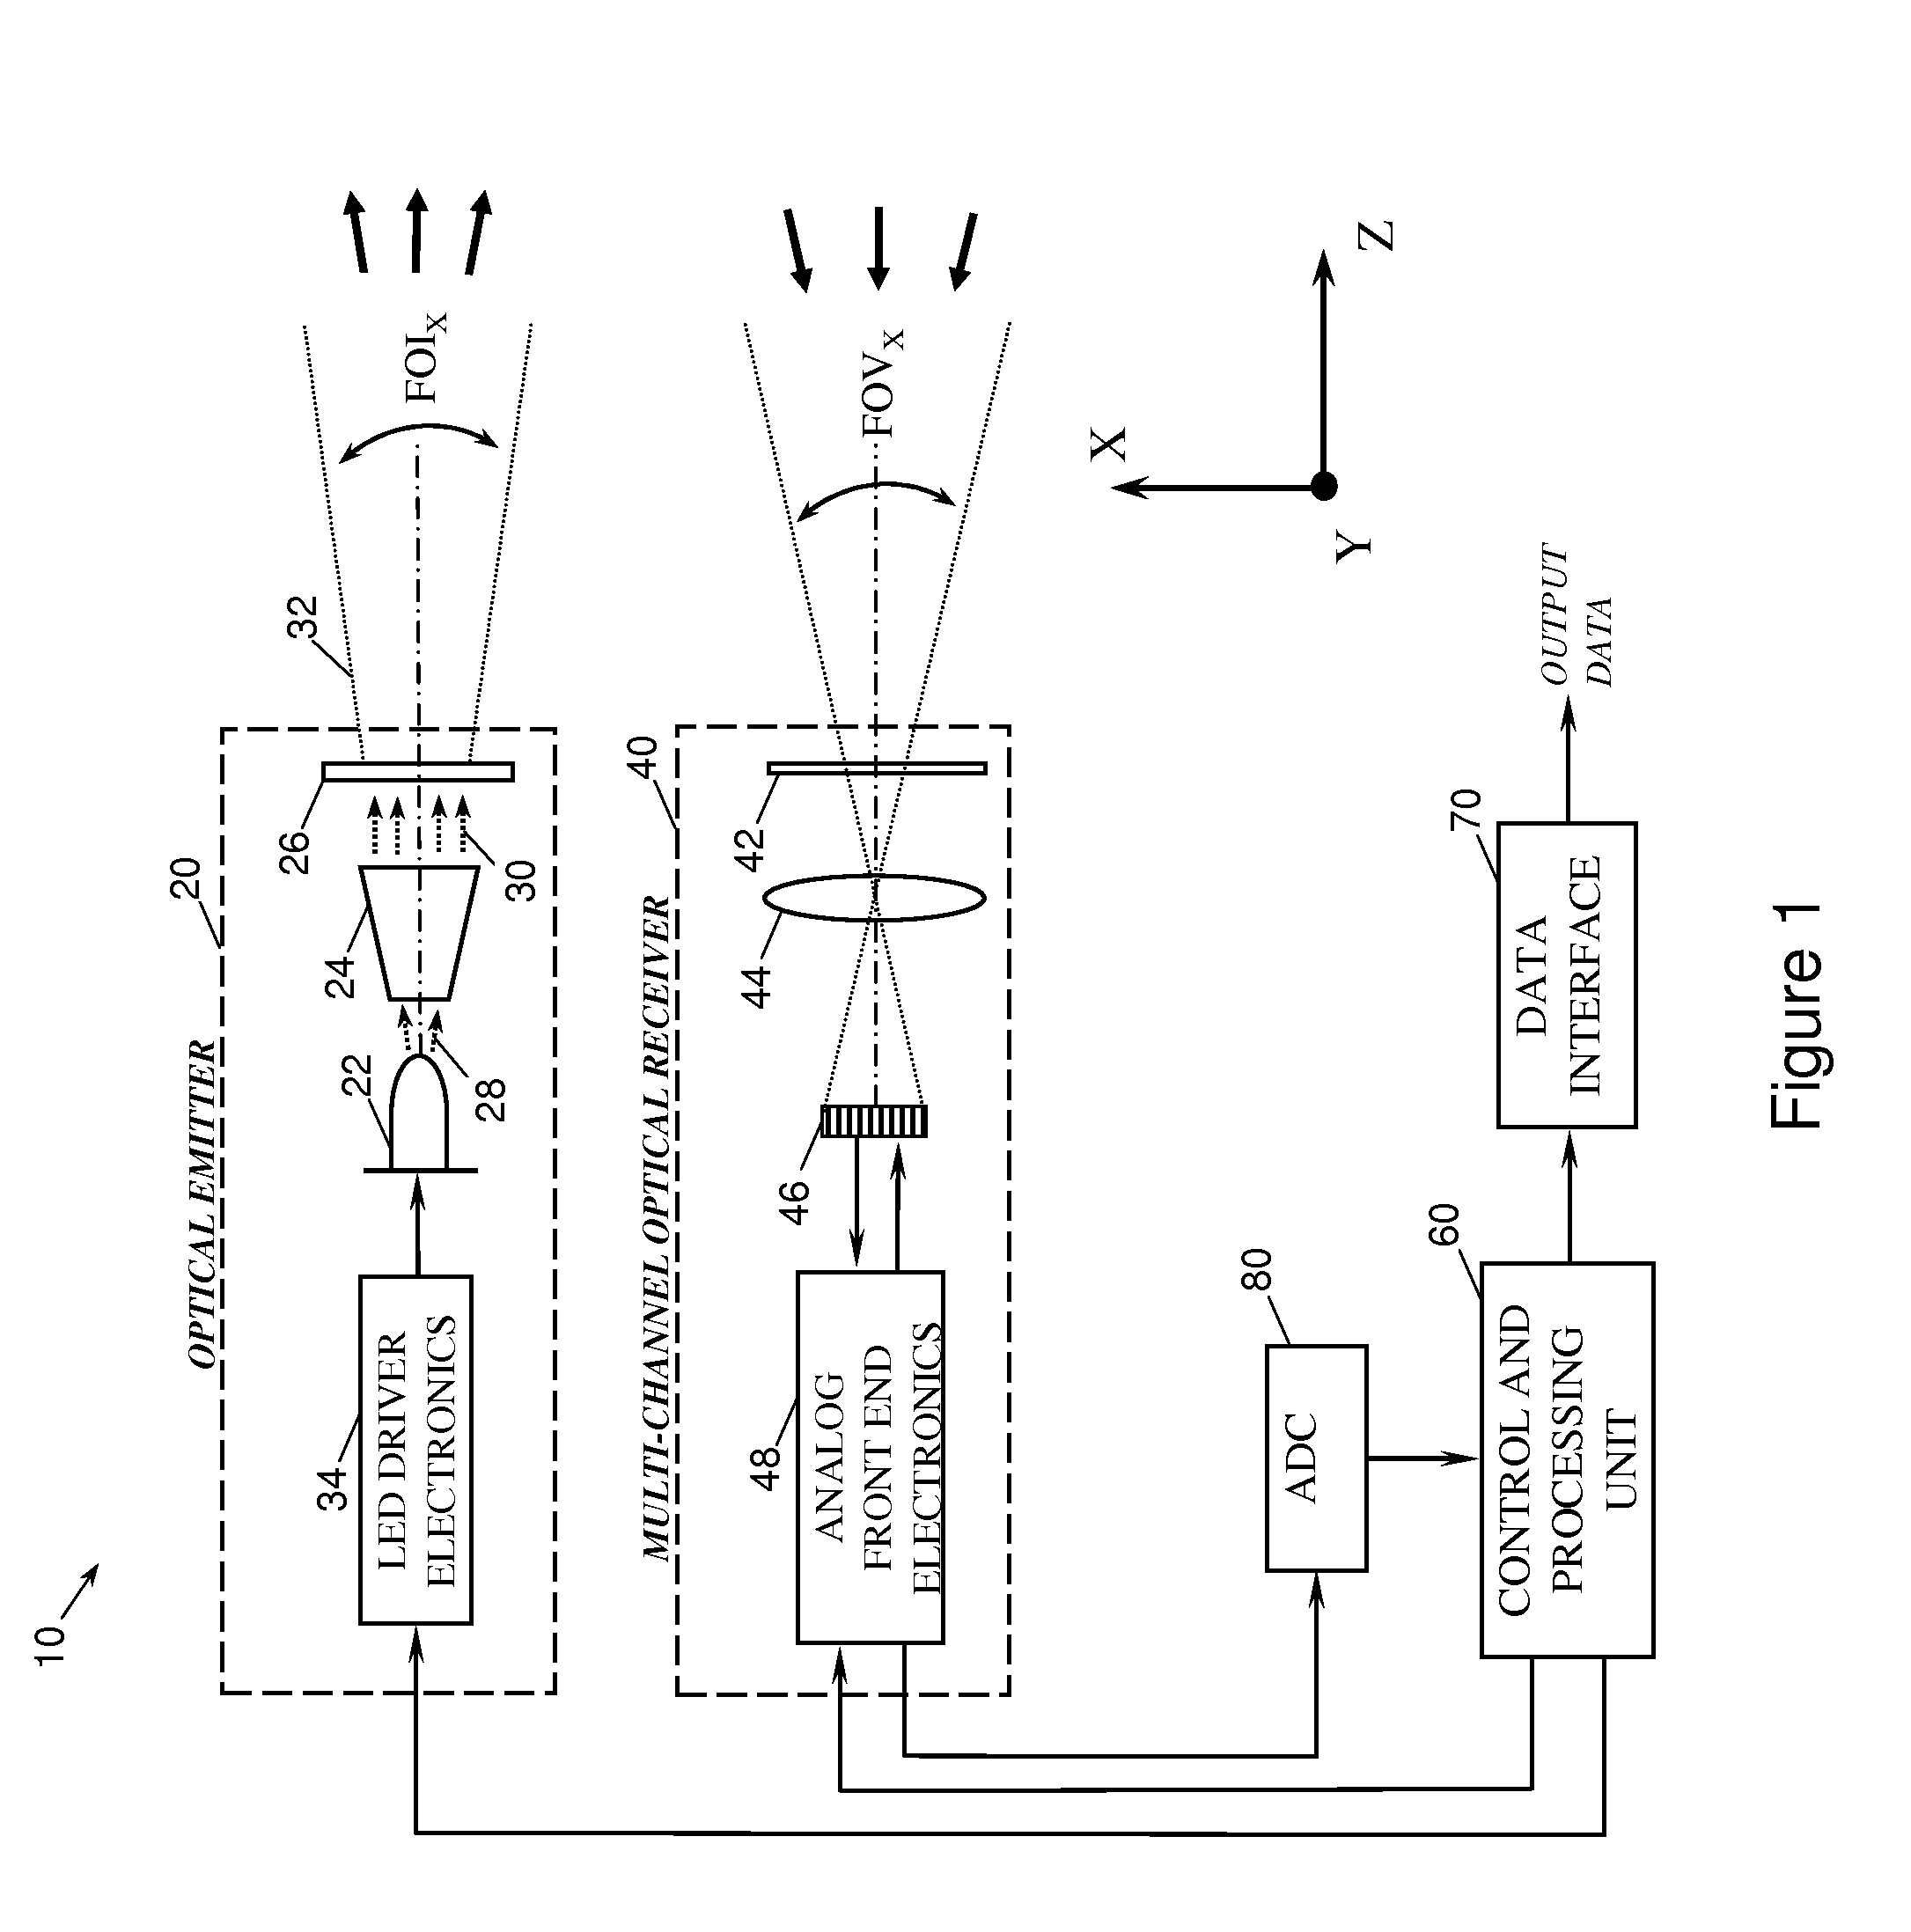 Multiple-field-of-view scannerless optical rangefinder in high ambient background light